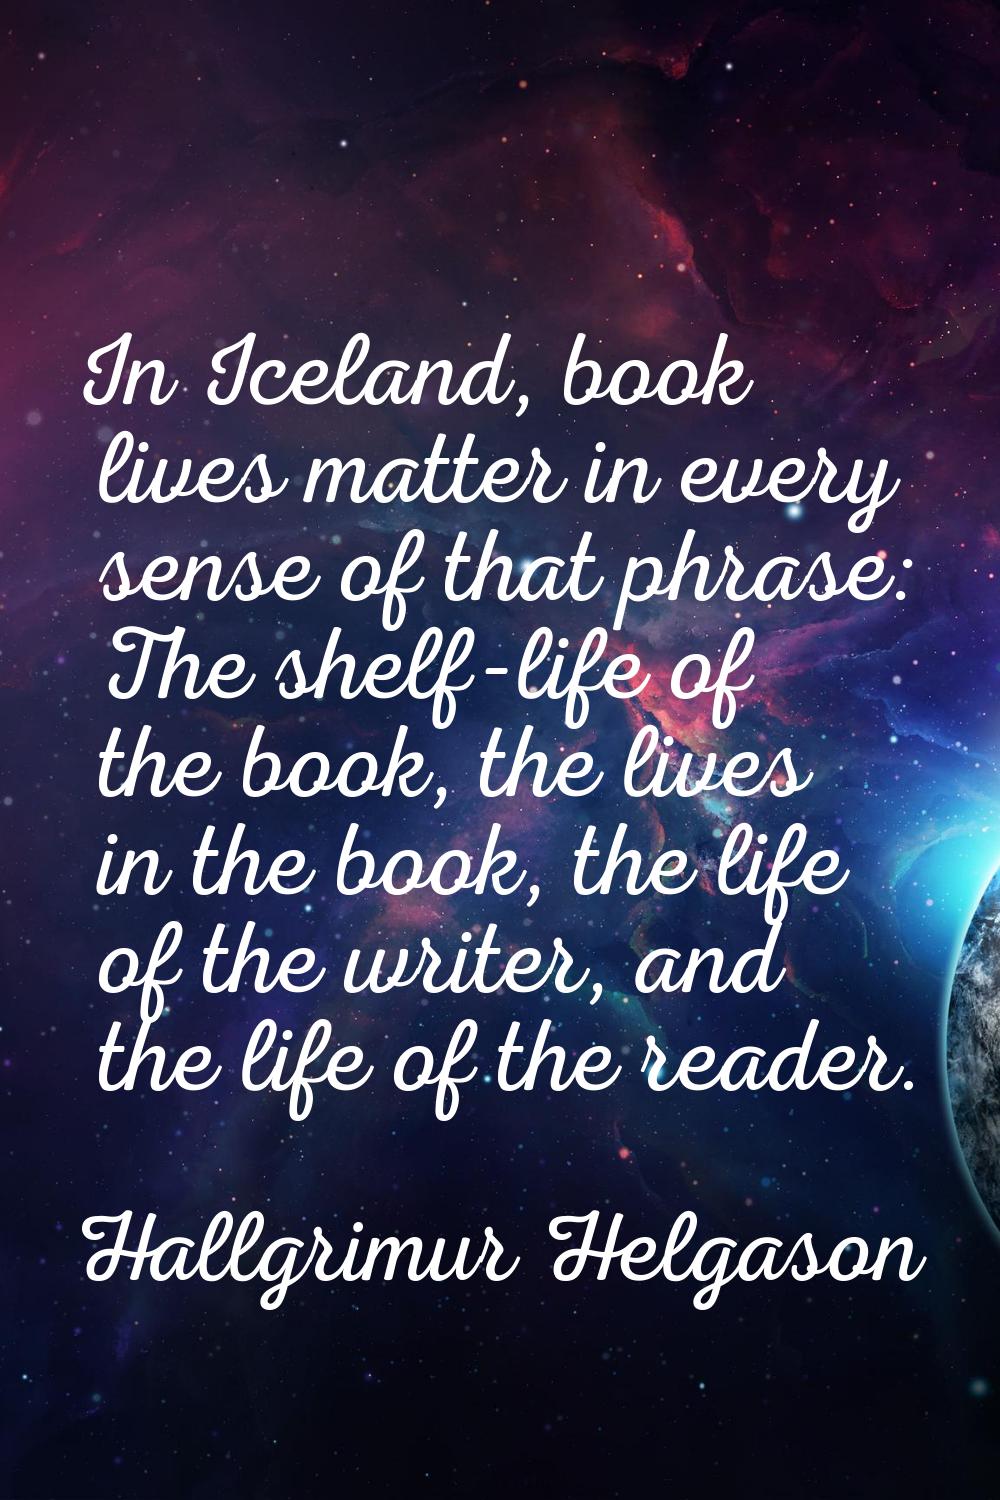 In Iceland, book lives matter in every sense of that phrase: The shelf-life of the book, the lives 